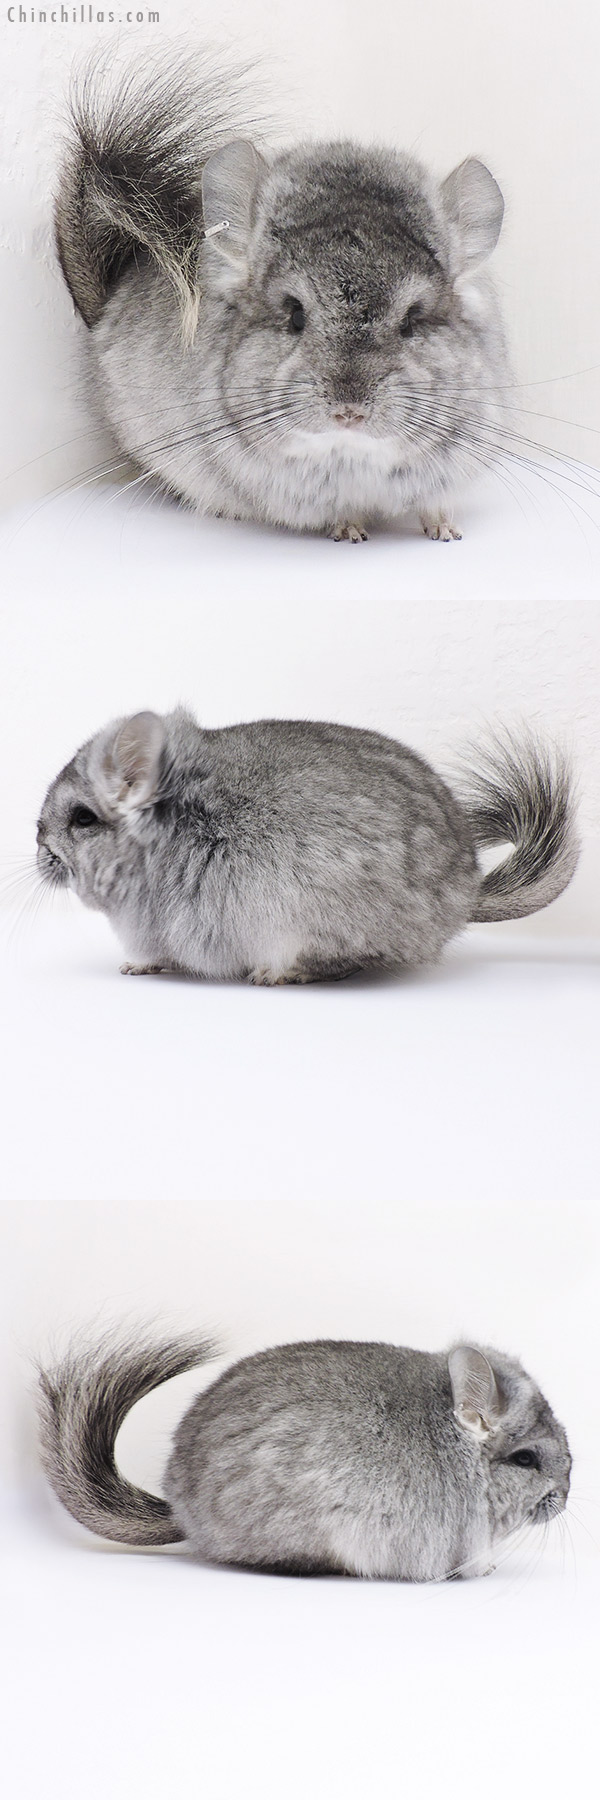 Chinchilla or related item offered for sale or export on Chinchillas.com - 16318 Standard ( Violet Carrier )  Royal Persian Angora Female Chinchilla